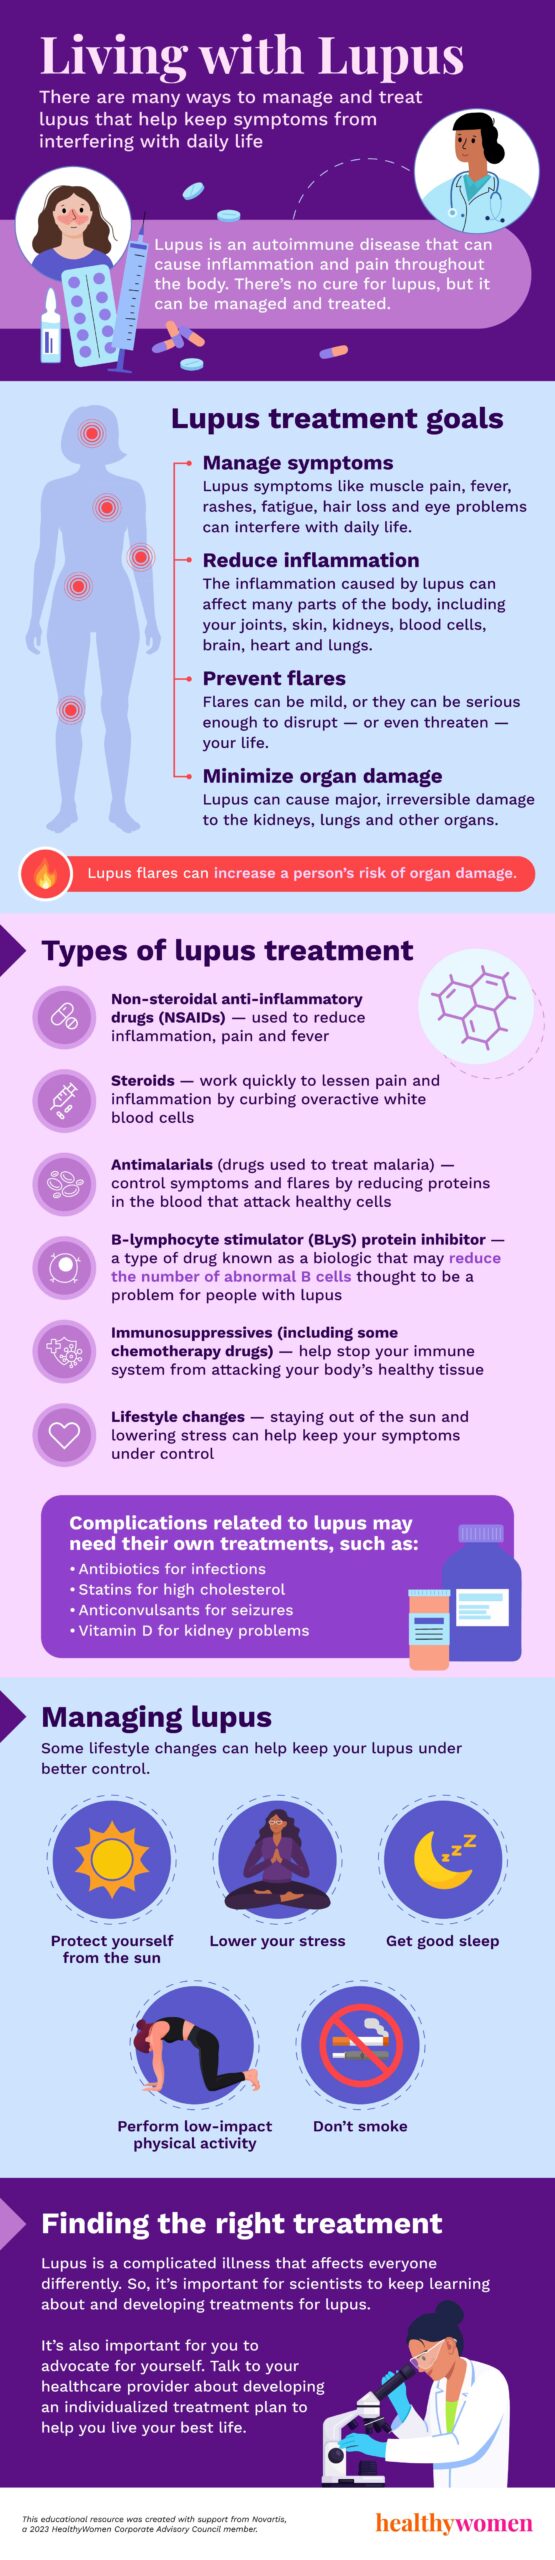 Living with Lupus infographic